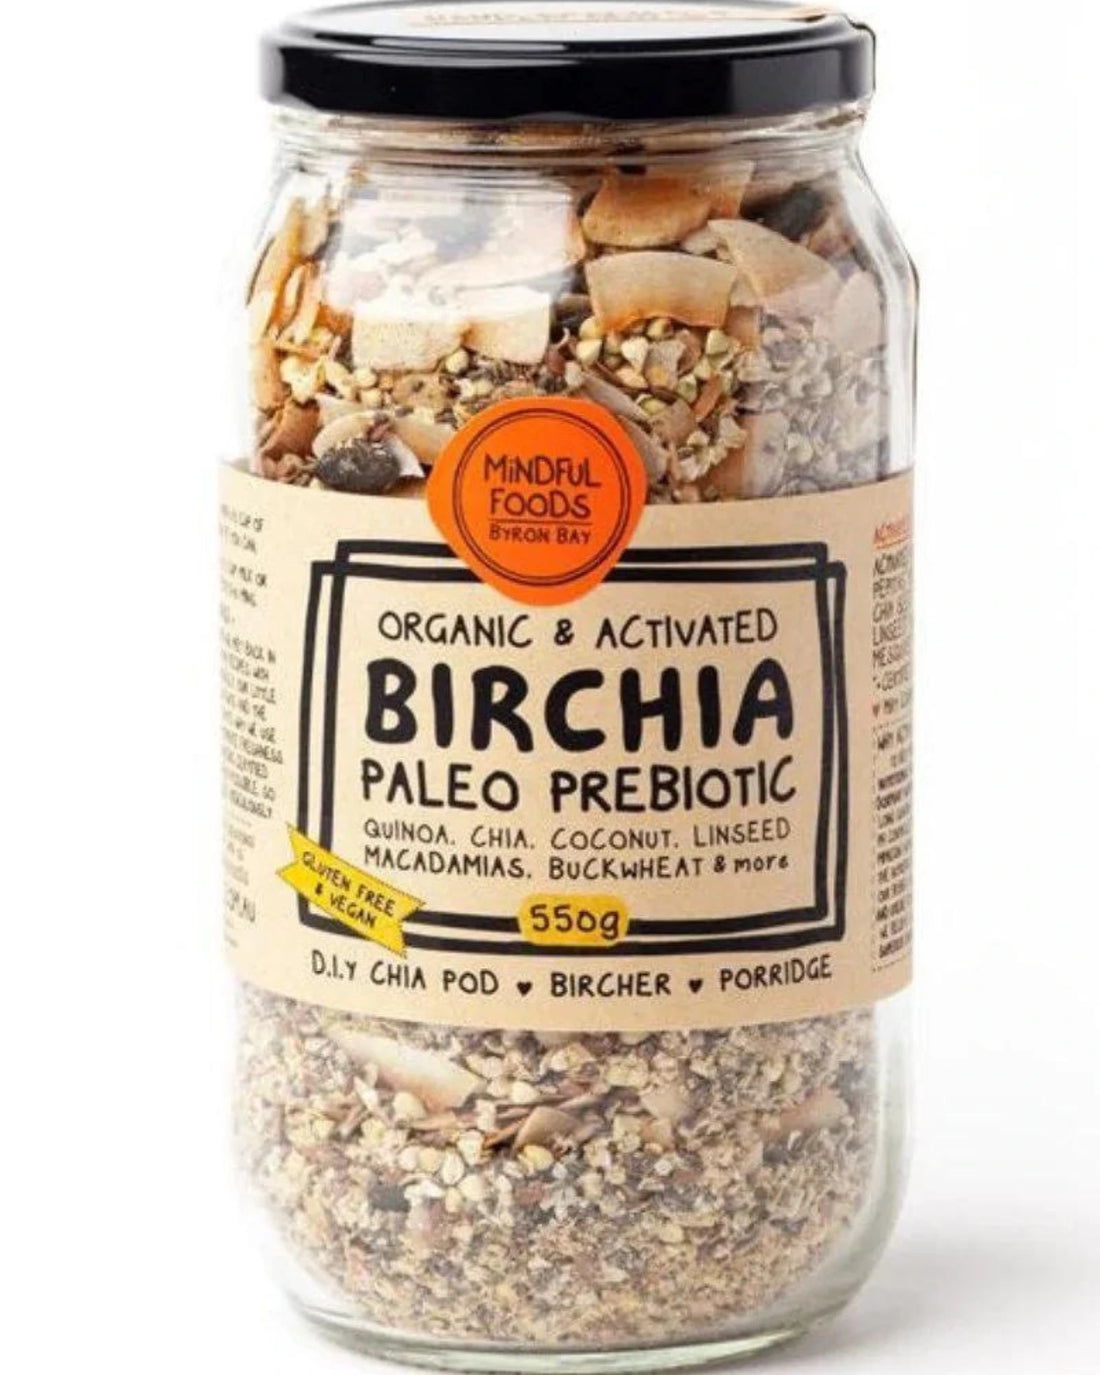  Birchia Paleo Prebiotic - Organic &amp; Activated by Mindful Foods (500g) 🌸